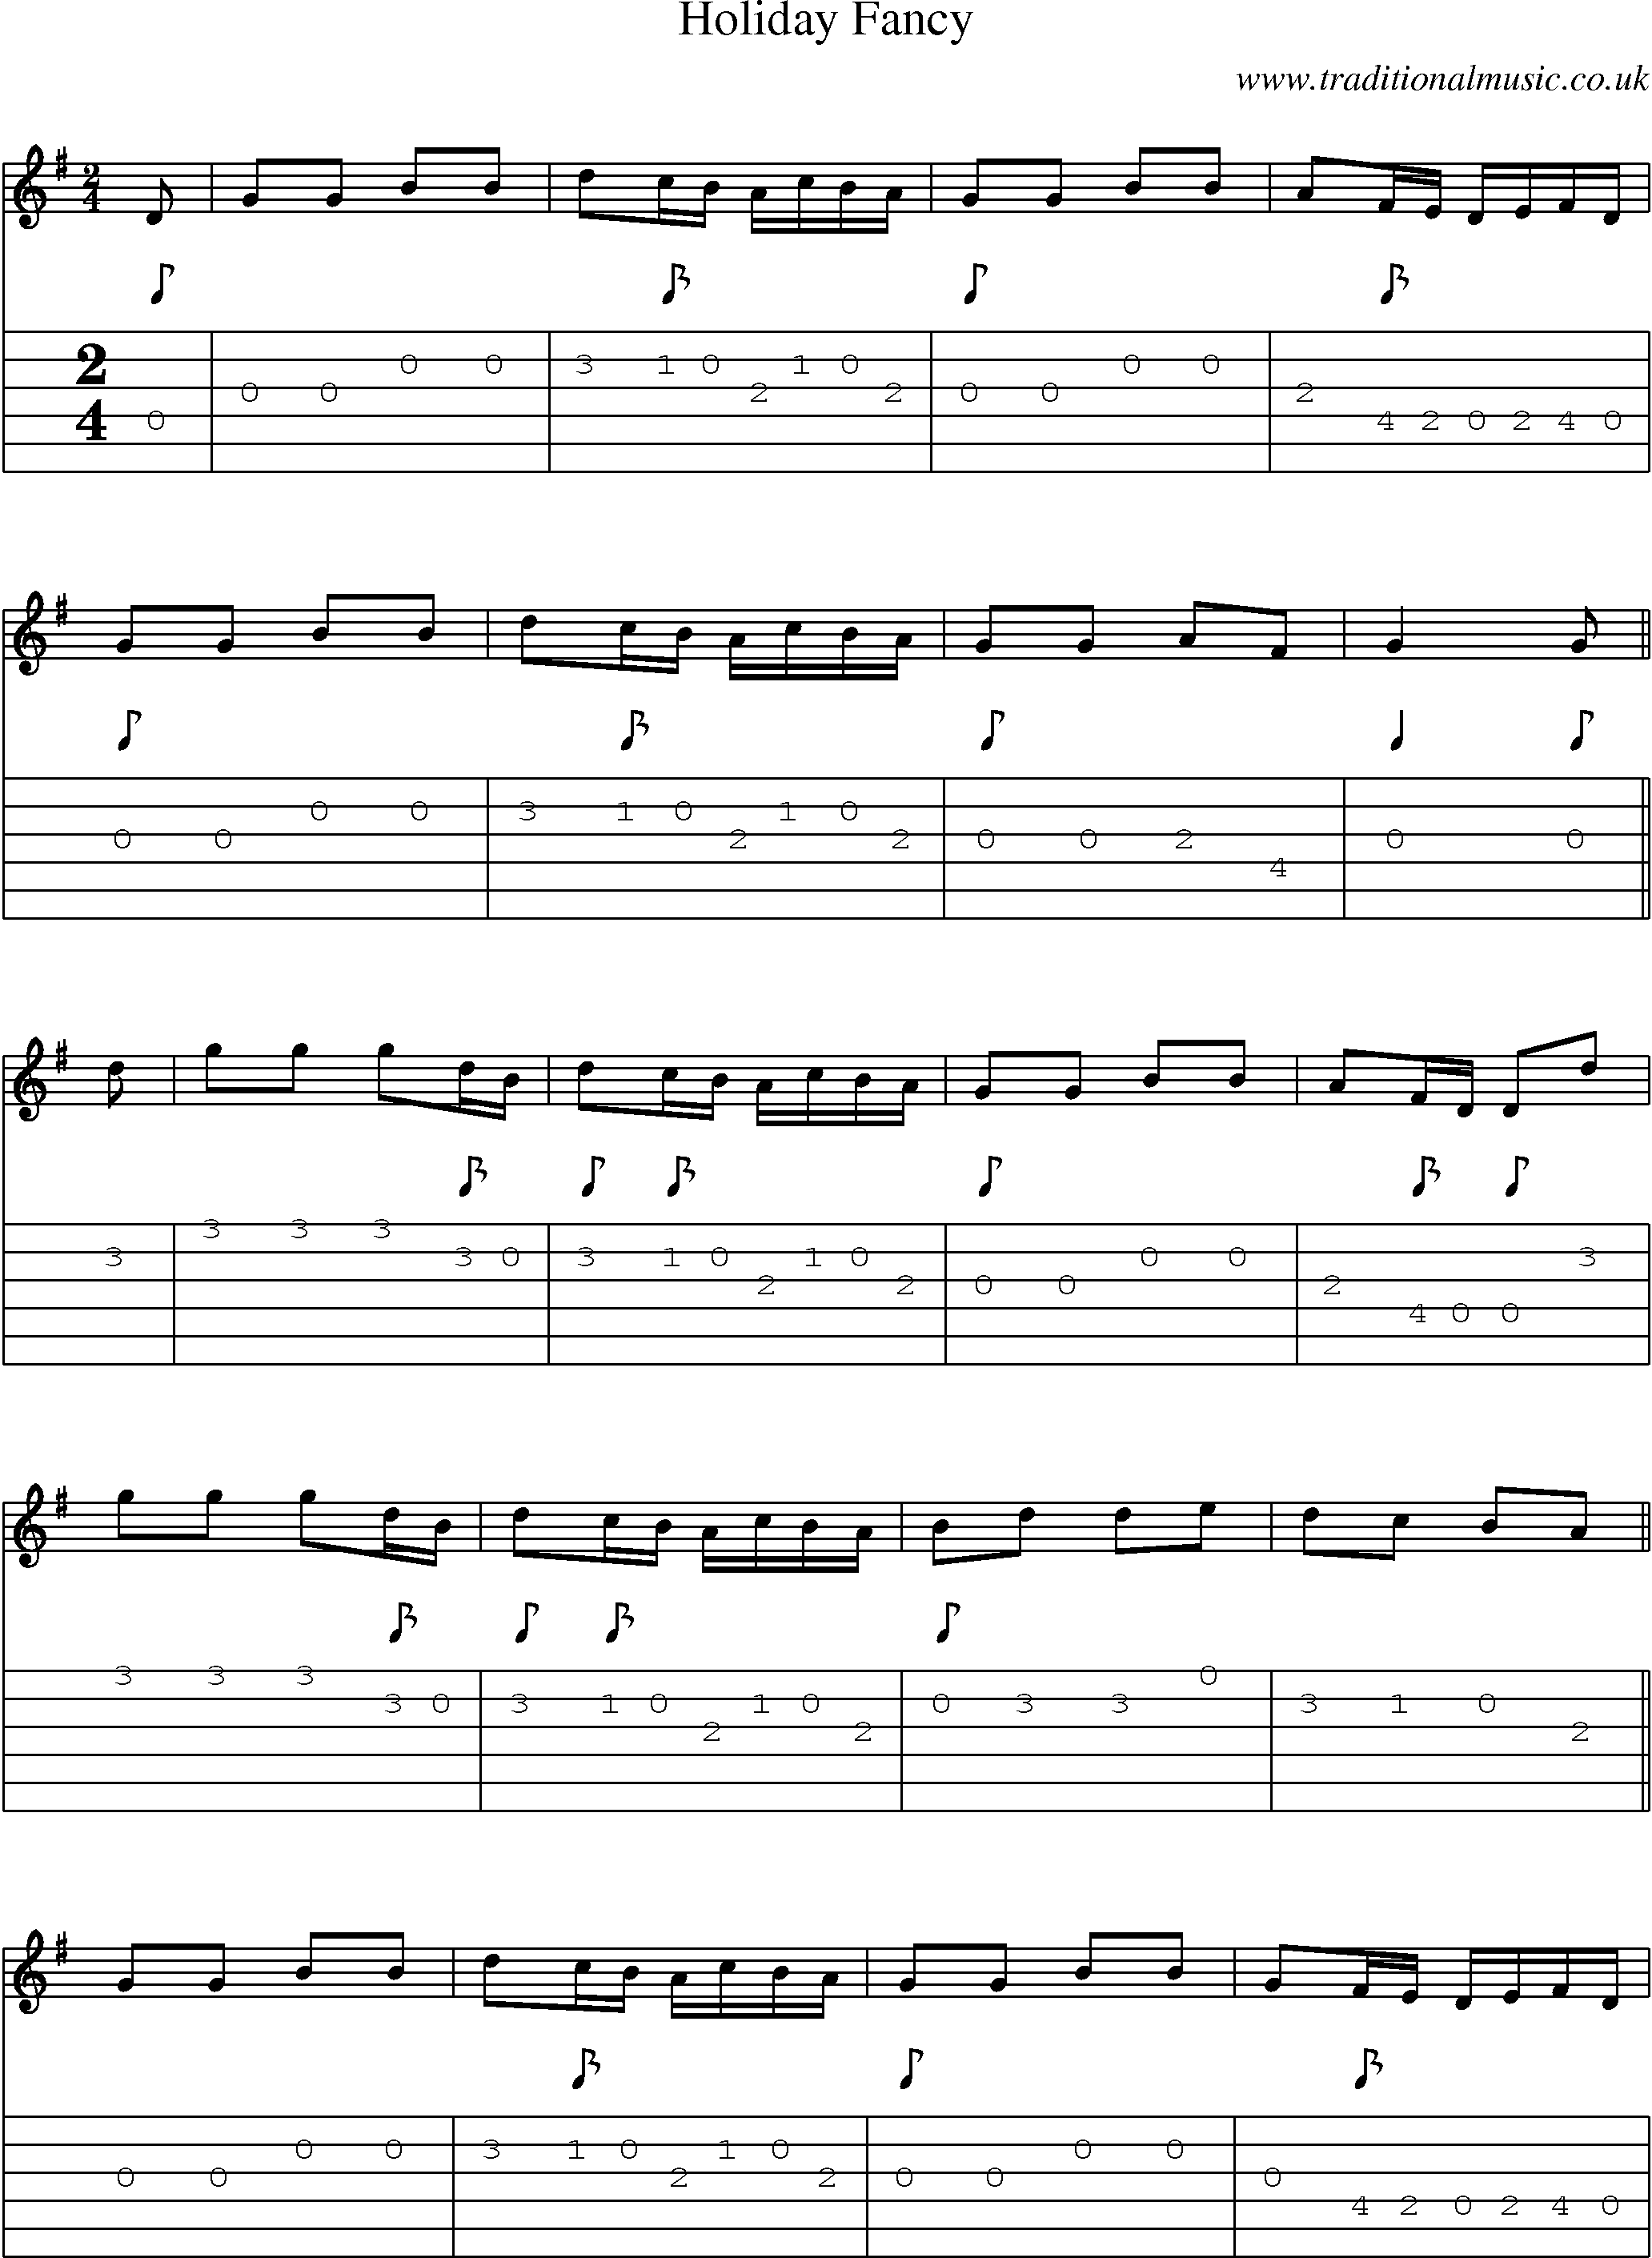 Music Score and Guitar Tabs for Holiday Fancy